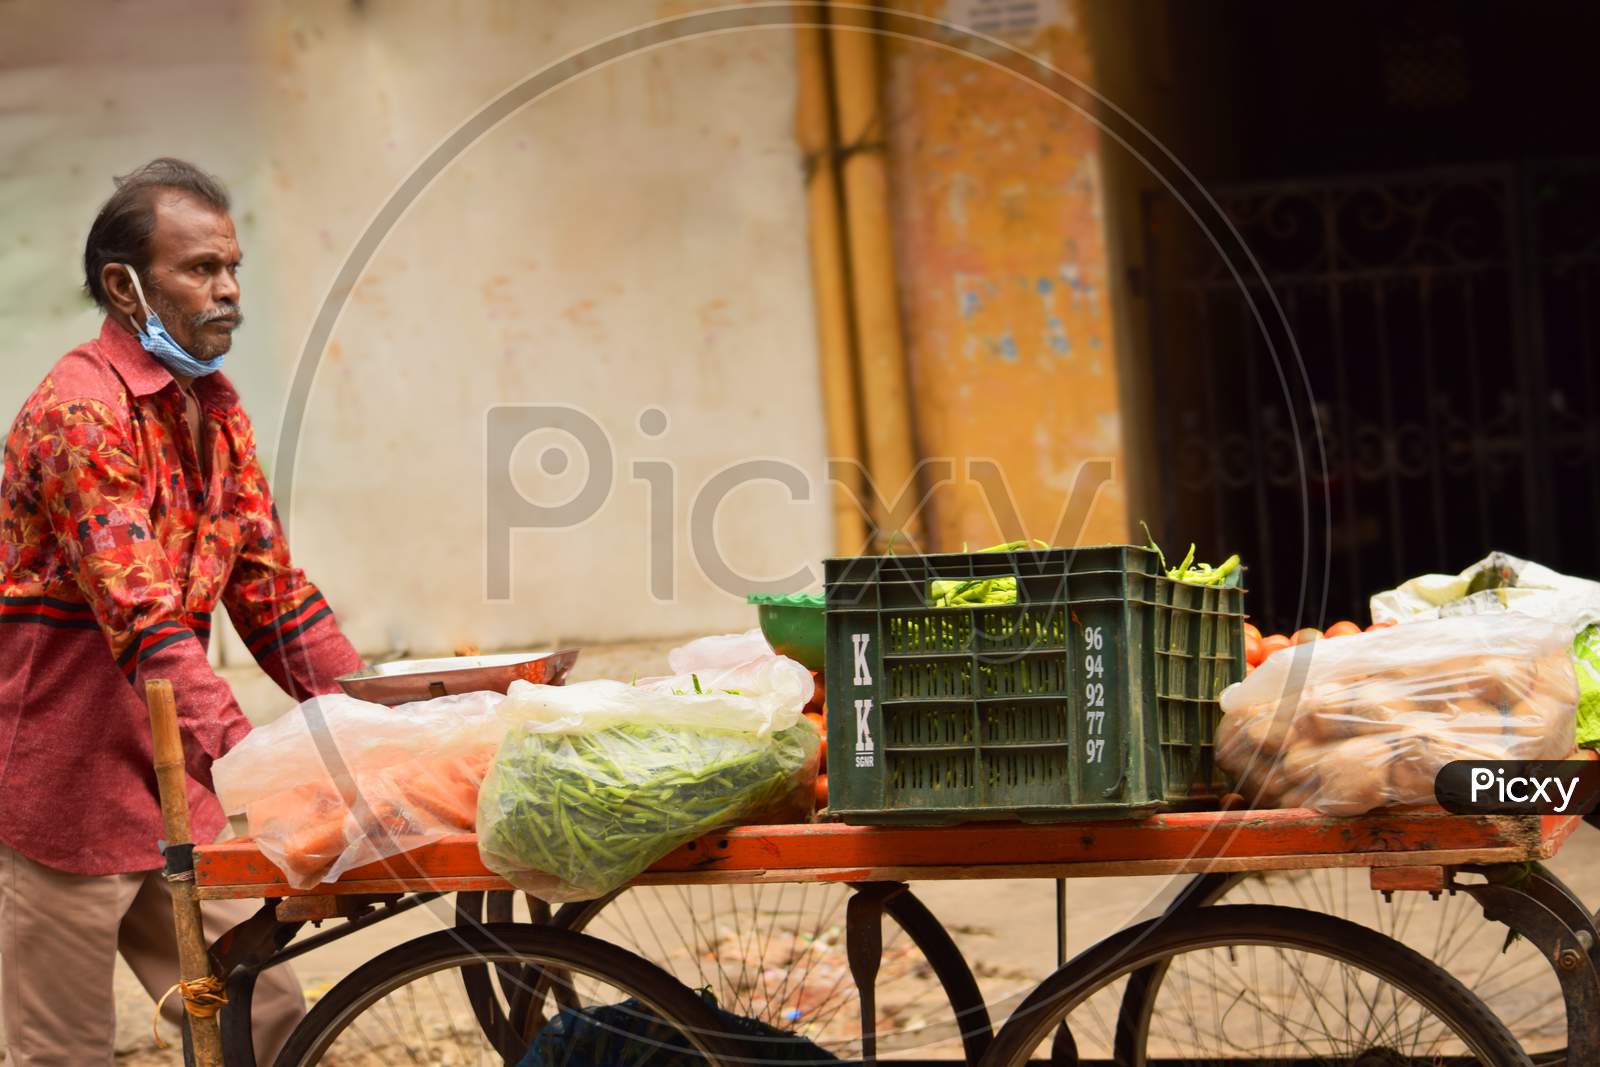 A Vegetables Trader Pushing His Cart On The Road